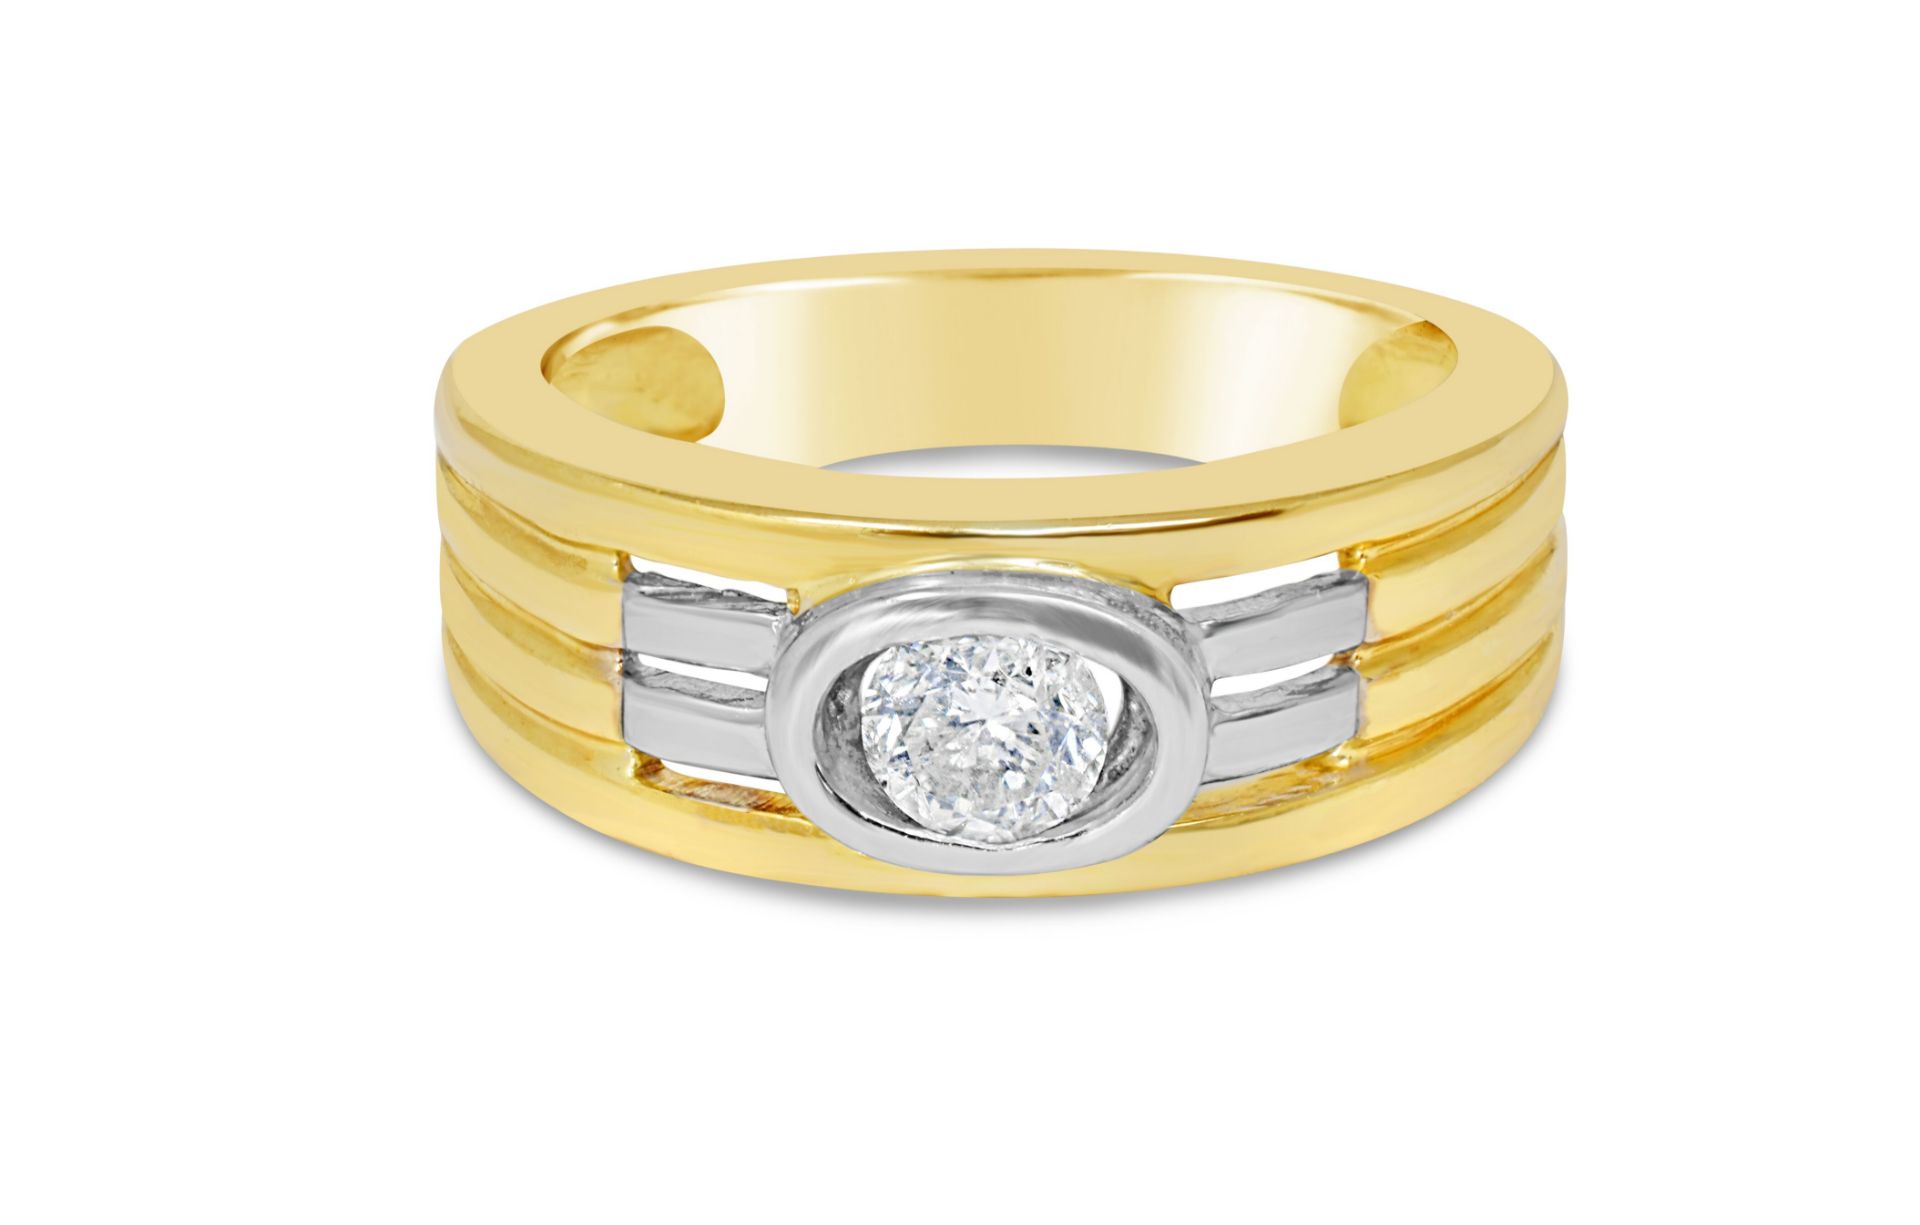 Wide Band Diamond Ring, Metal 9ct Yellow Gold, Wei - Image 2 of 3